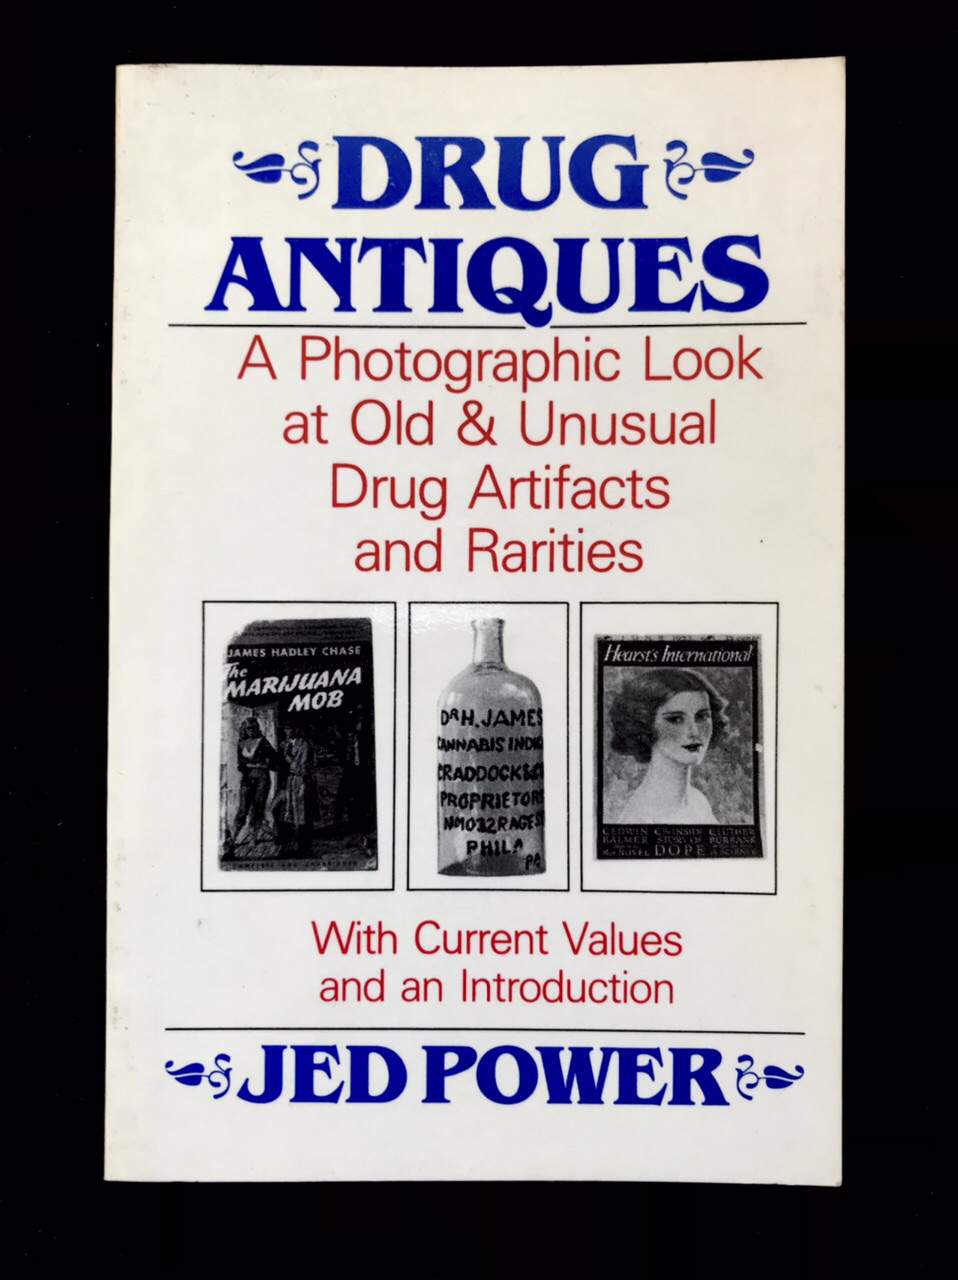 Drug Antiques: A Photographic Look at Old and Unusual Drug Artifacts and Rarities by Jed Power